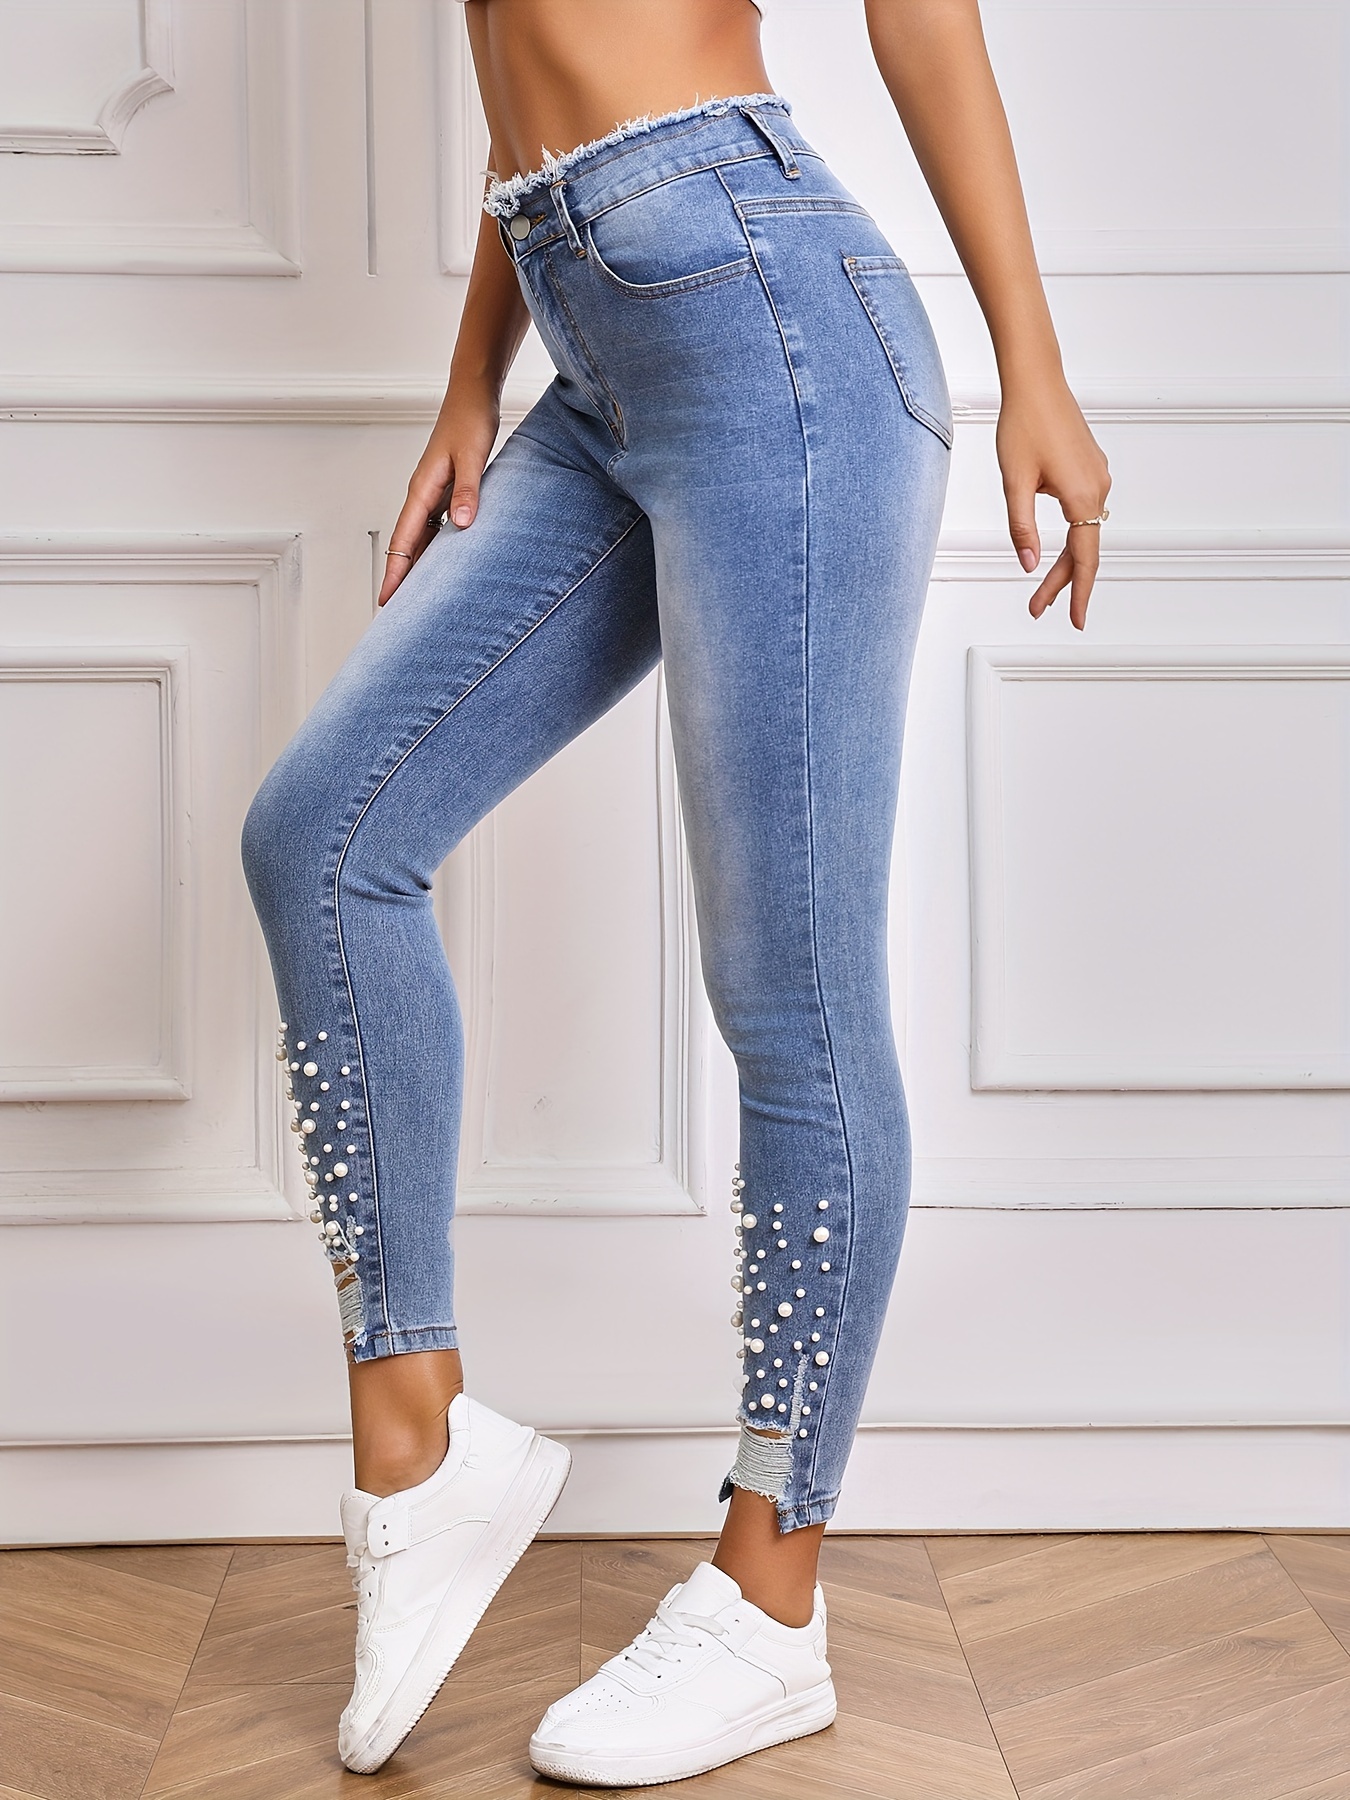 Blue Faux Pearl Decor Skinny Jeans, Studded Slim Fit Slight Stretch Tight  Jeans, Women's Denim Jeans & Clothing